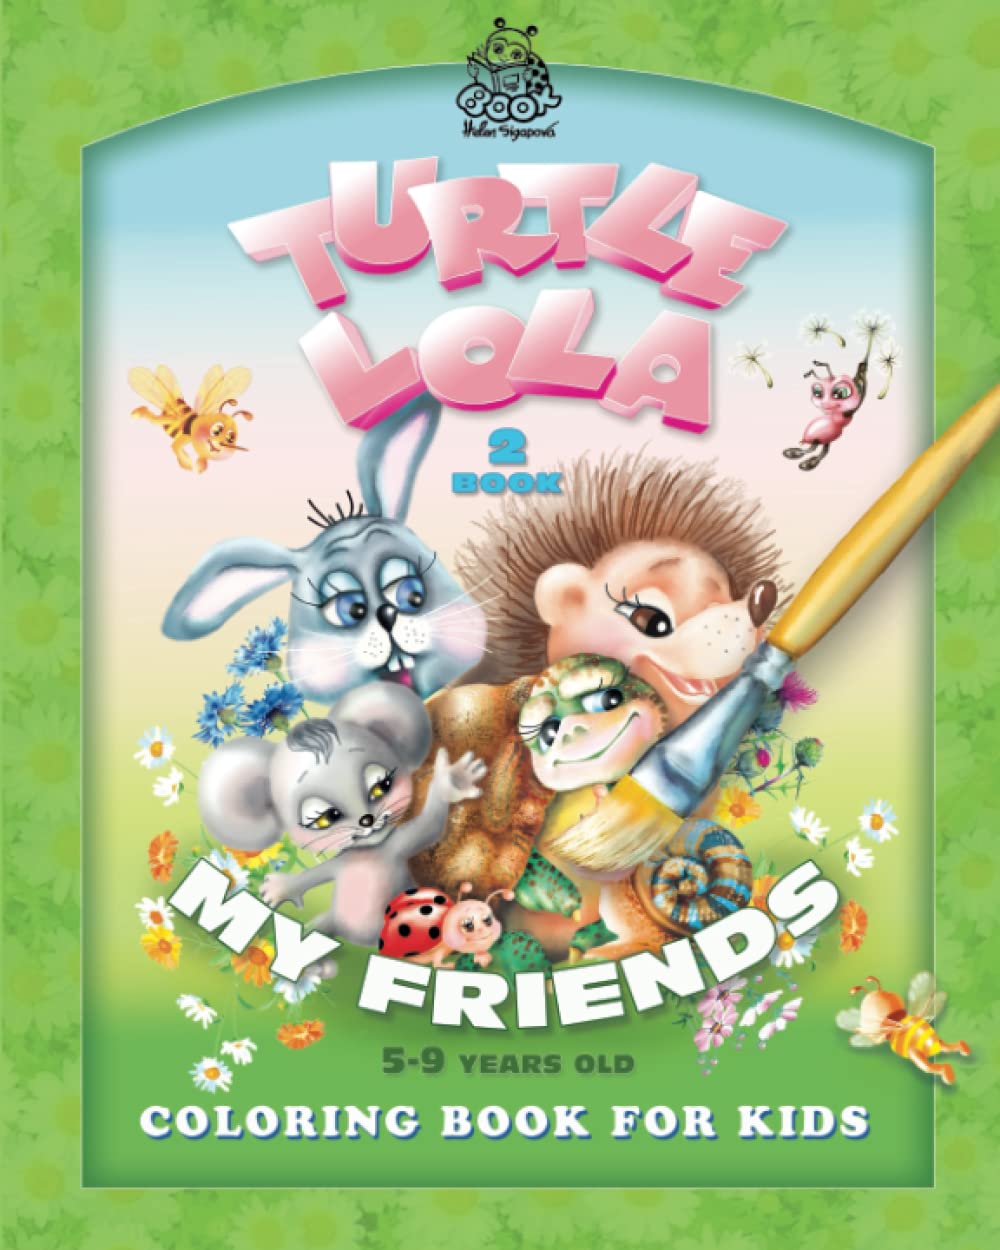 TURTLE LOLA: MY FRIENDS. COLORING BOOK FOR CHILDREN 5-9 YEARS (TURTLE LOLA STORIES)